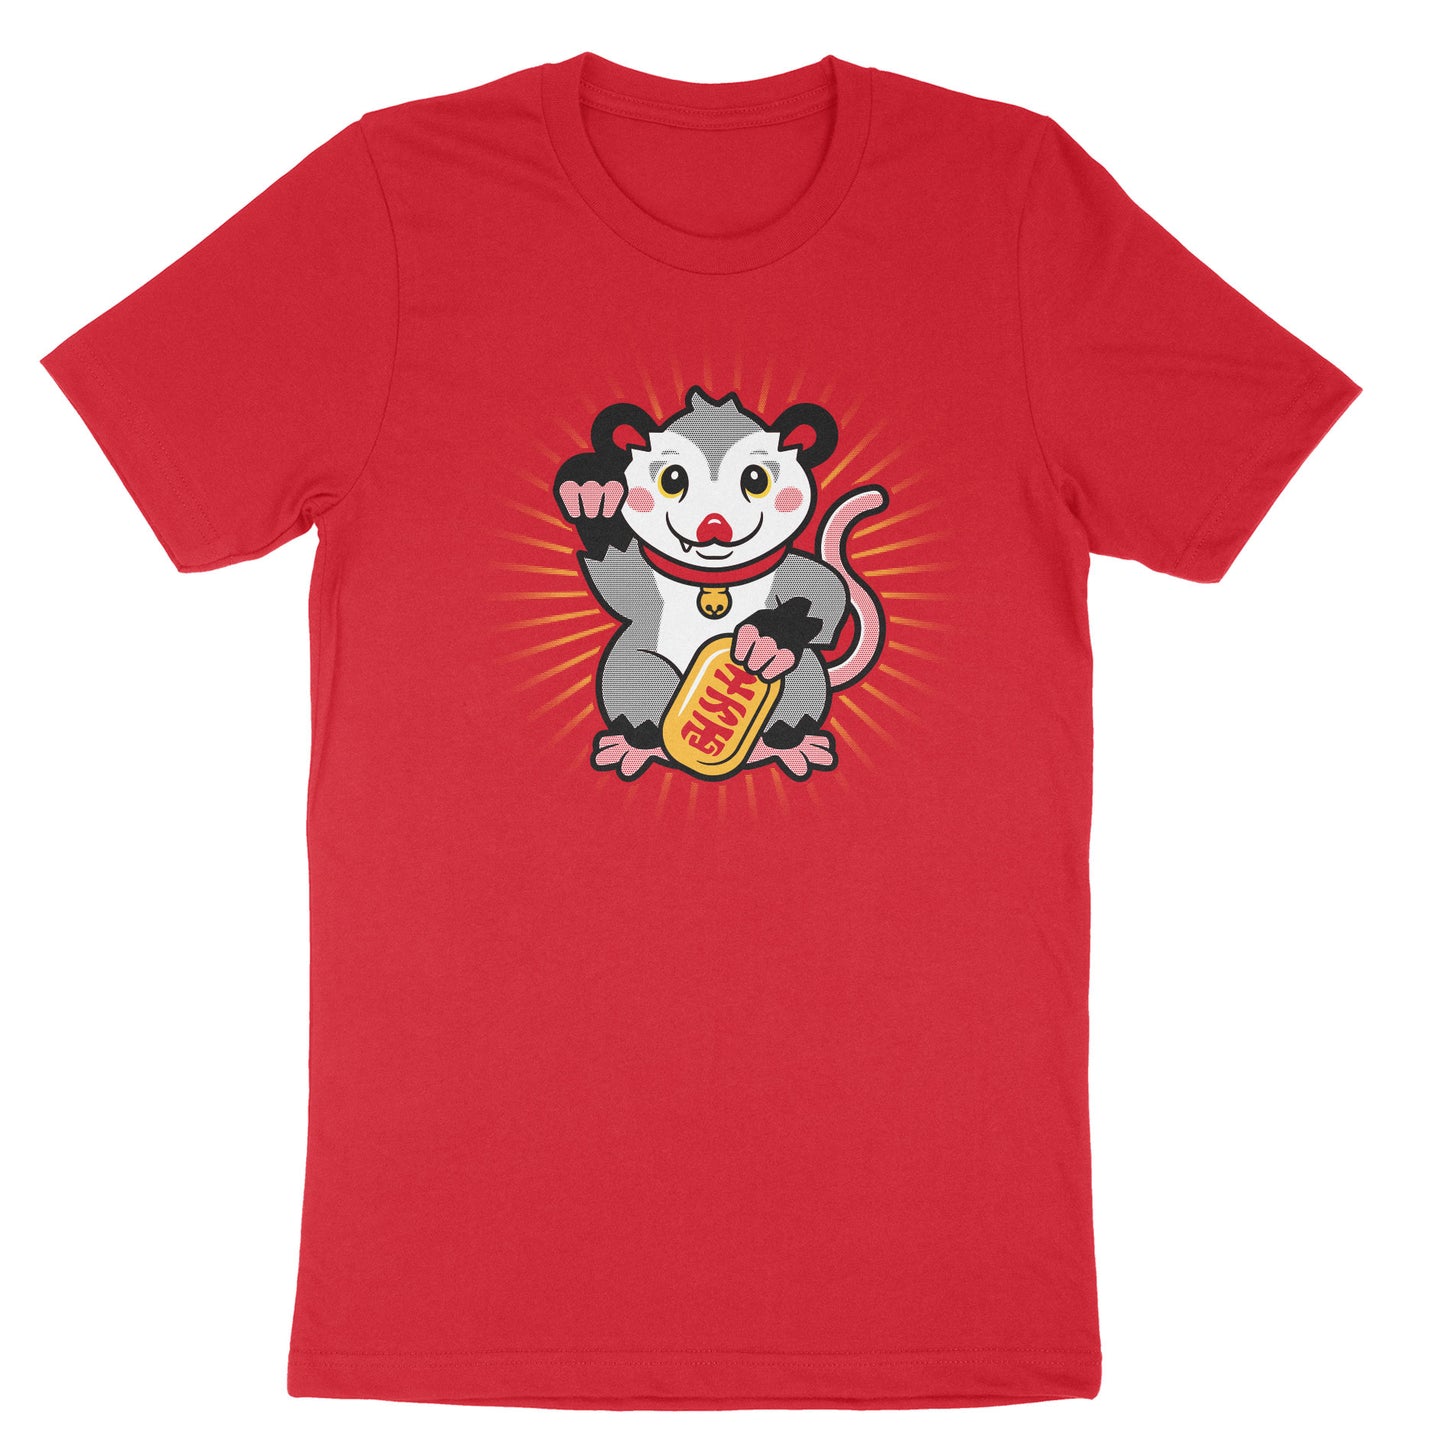 Thumbnail of a possum in the "lucky cat" pose on a red shirt